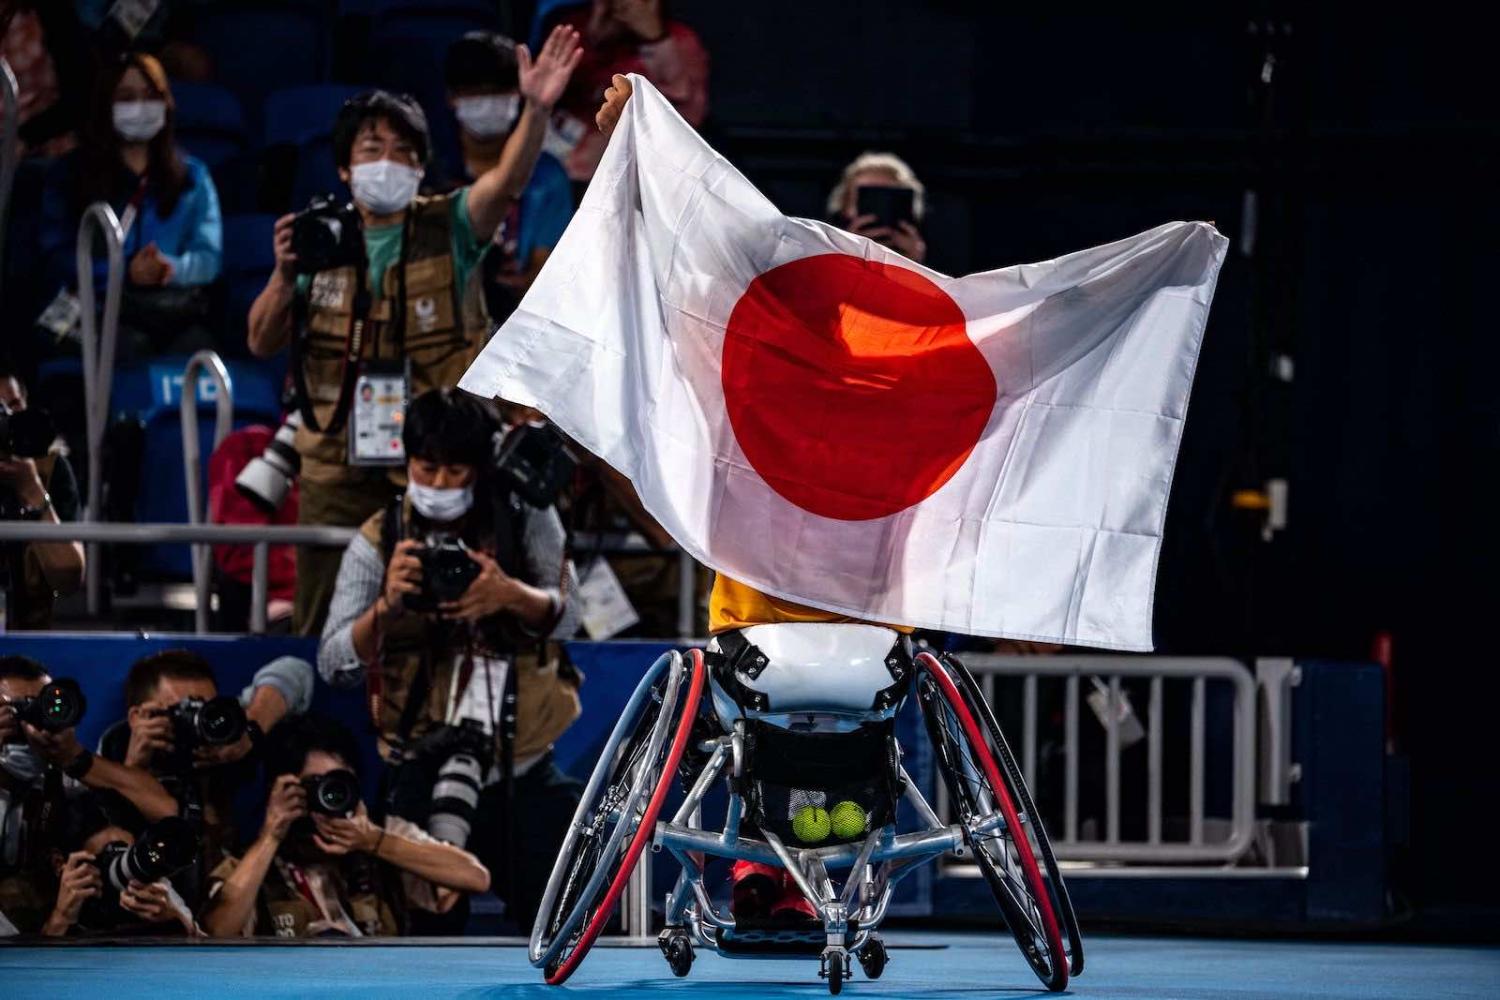 Japan’s Shingo Kunieda celebrates after winning the men’s singles gold medal wheelchair tennis match on 4 September (Philip Fong/AFP via Getty Images)